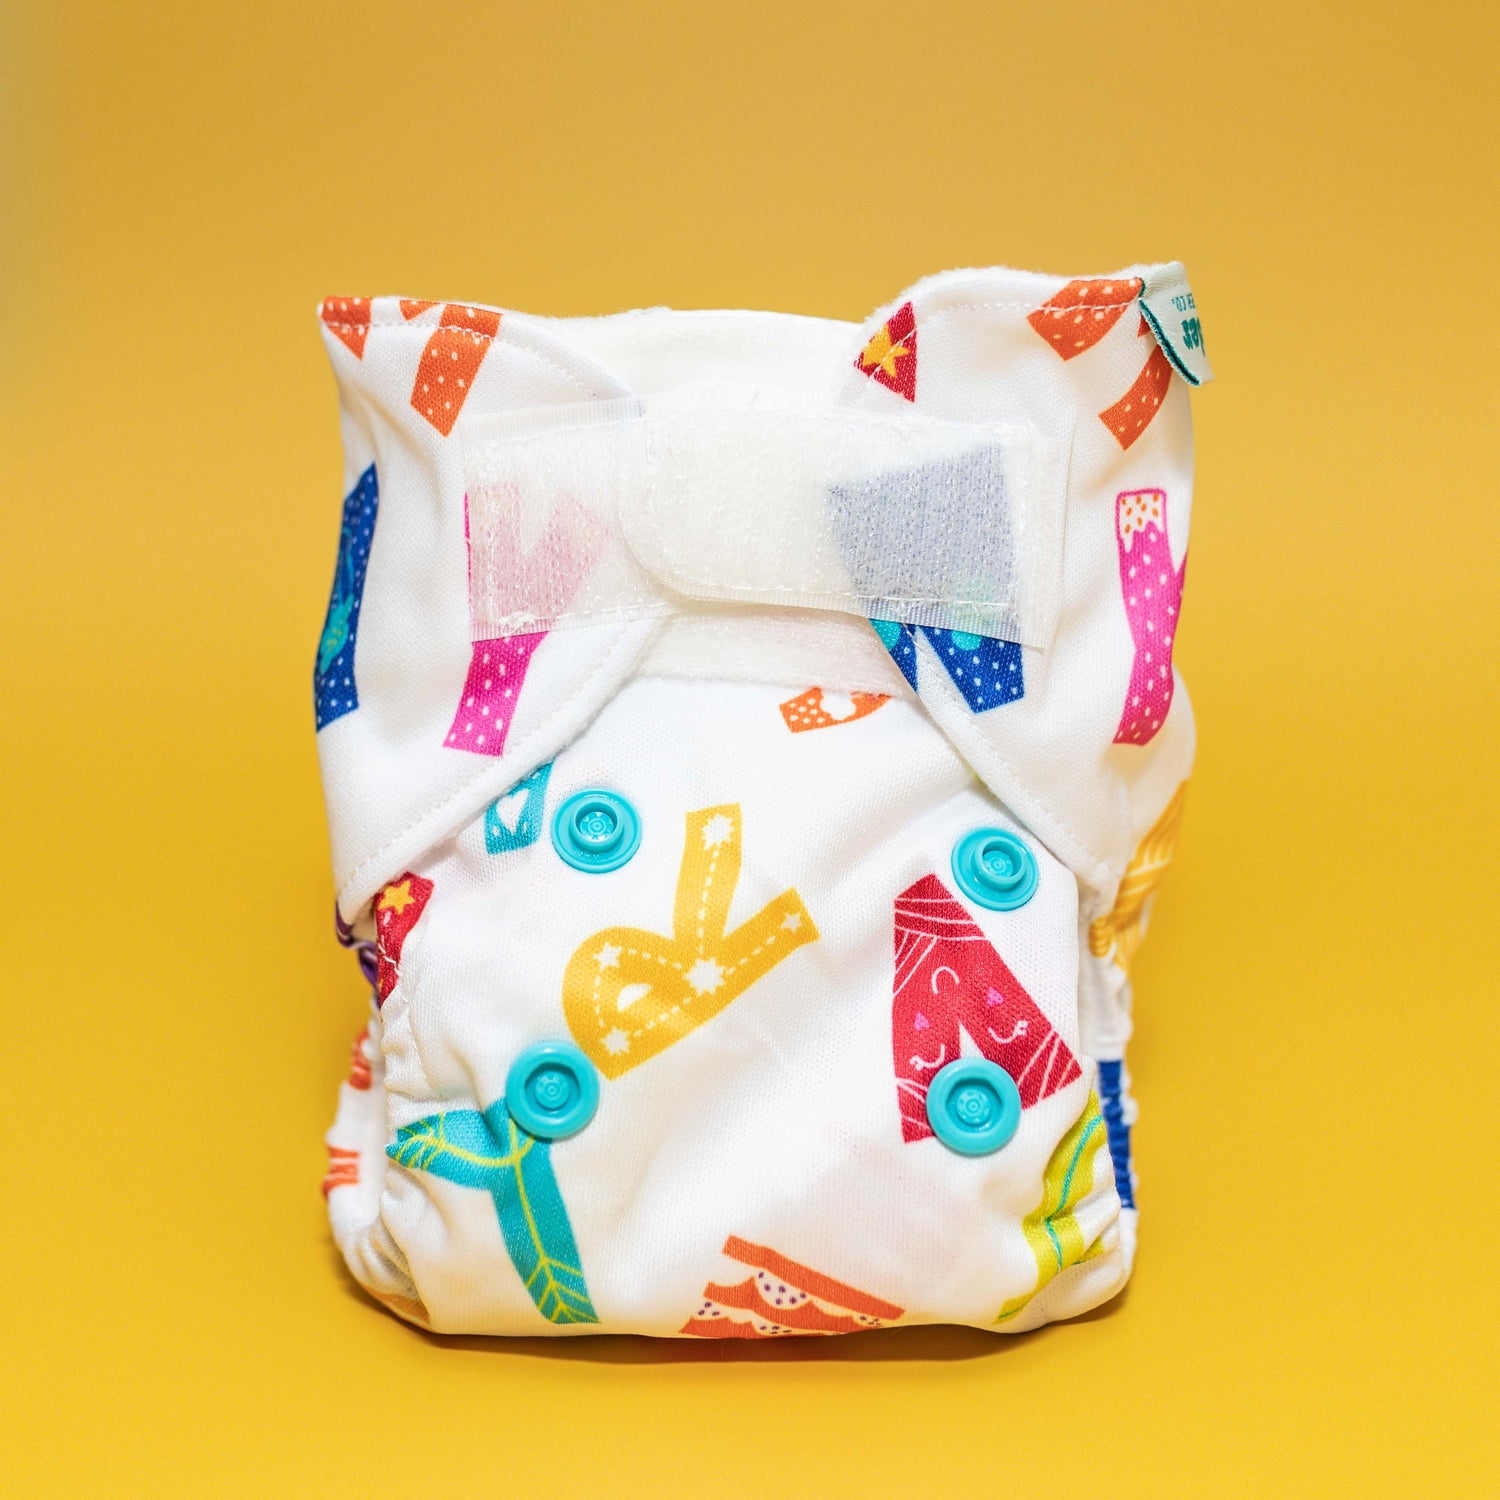 Reusable Doll Toy Diaper with Optional Mini Reusable Wipe Set